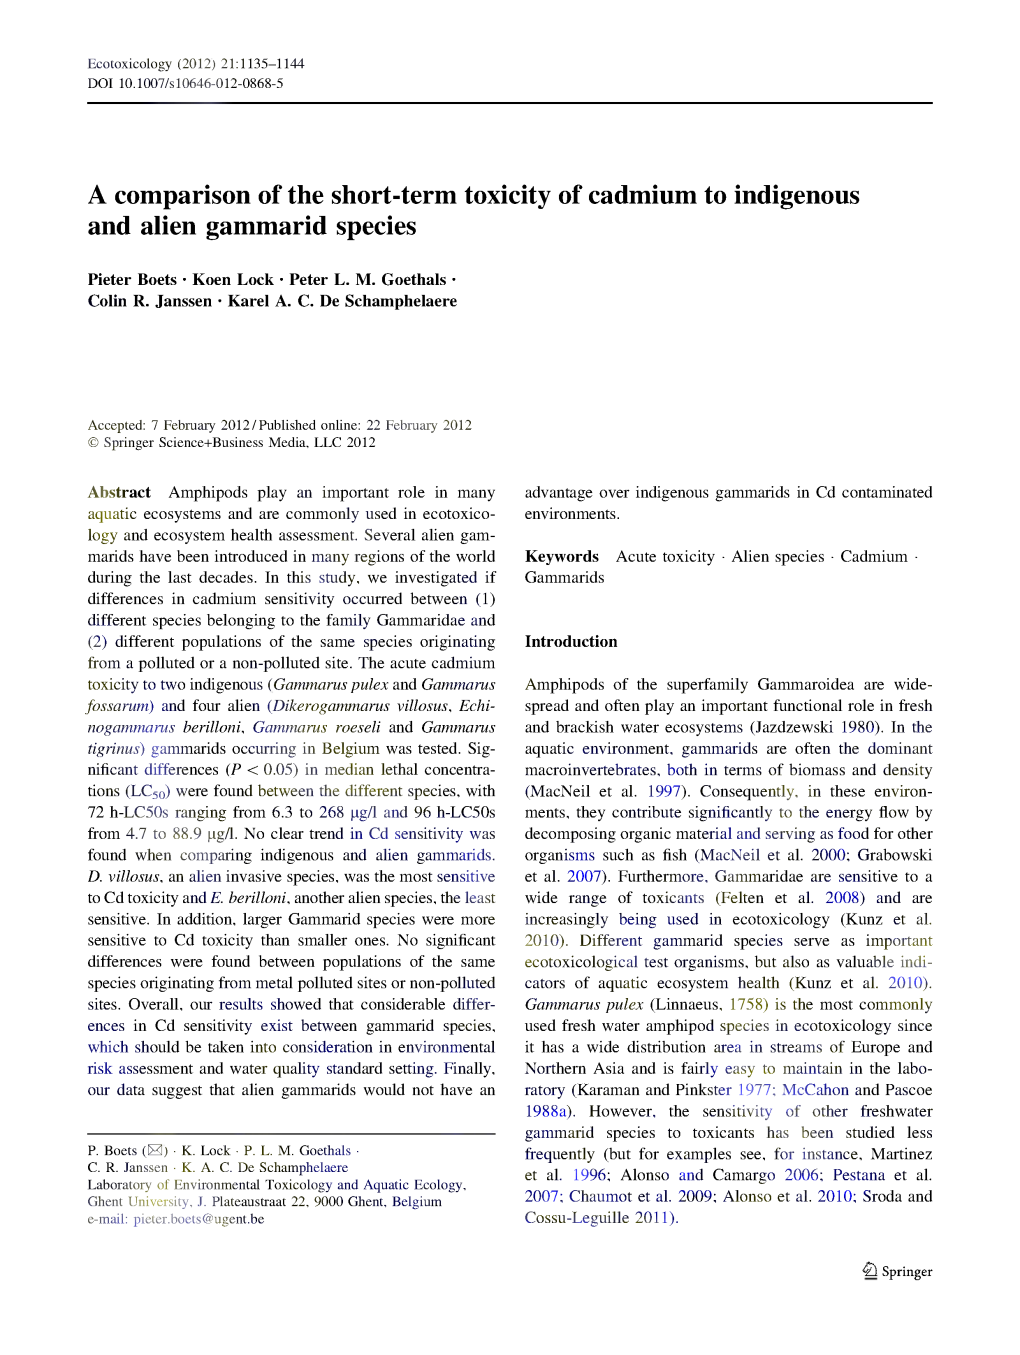 A Comparison of the Short-Term Toxicity of Cadmium to Indigenous and Alien Gammarid Species